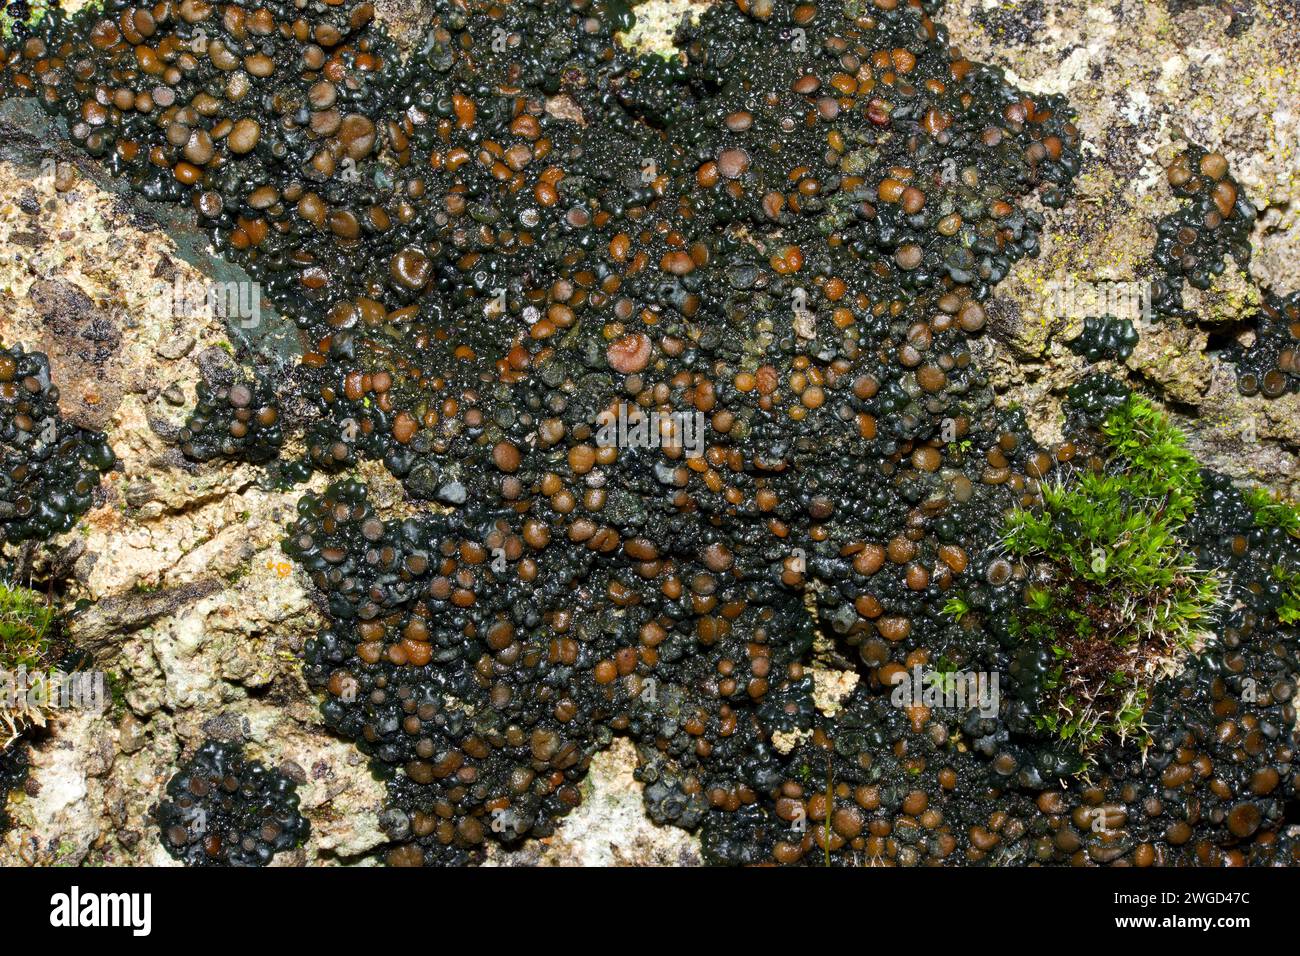 Enchylium tenax (jelly lichen) is often found on calcareous soils and mortar. It occurs in Arctic and temperate regions in the Northern Hemisphere. Stock Photo